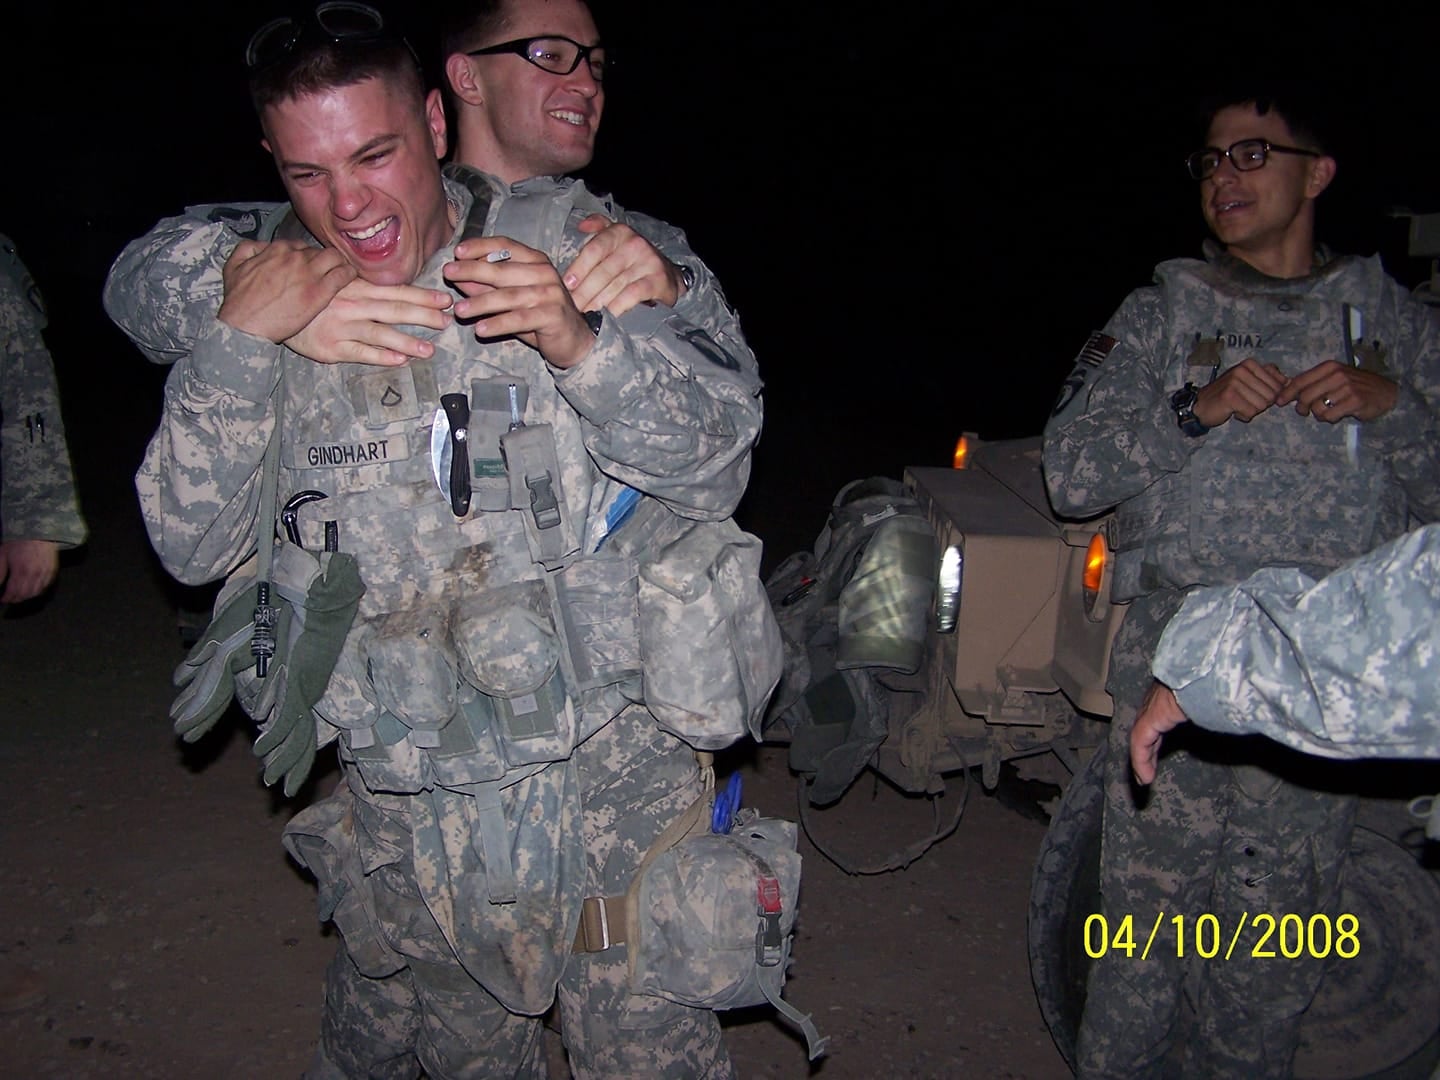 These photos capture what life is really like in the military